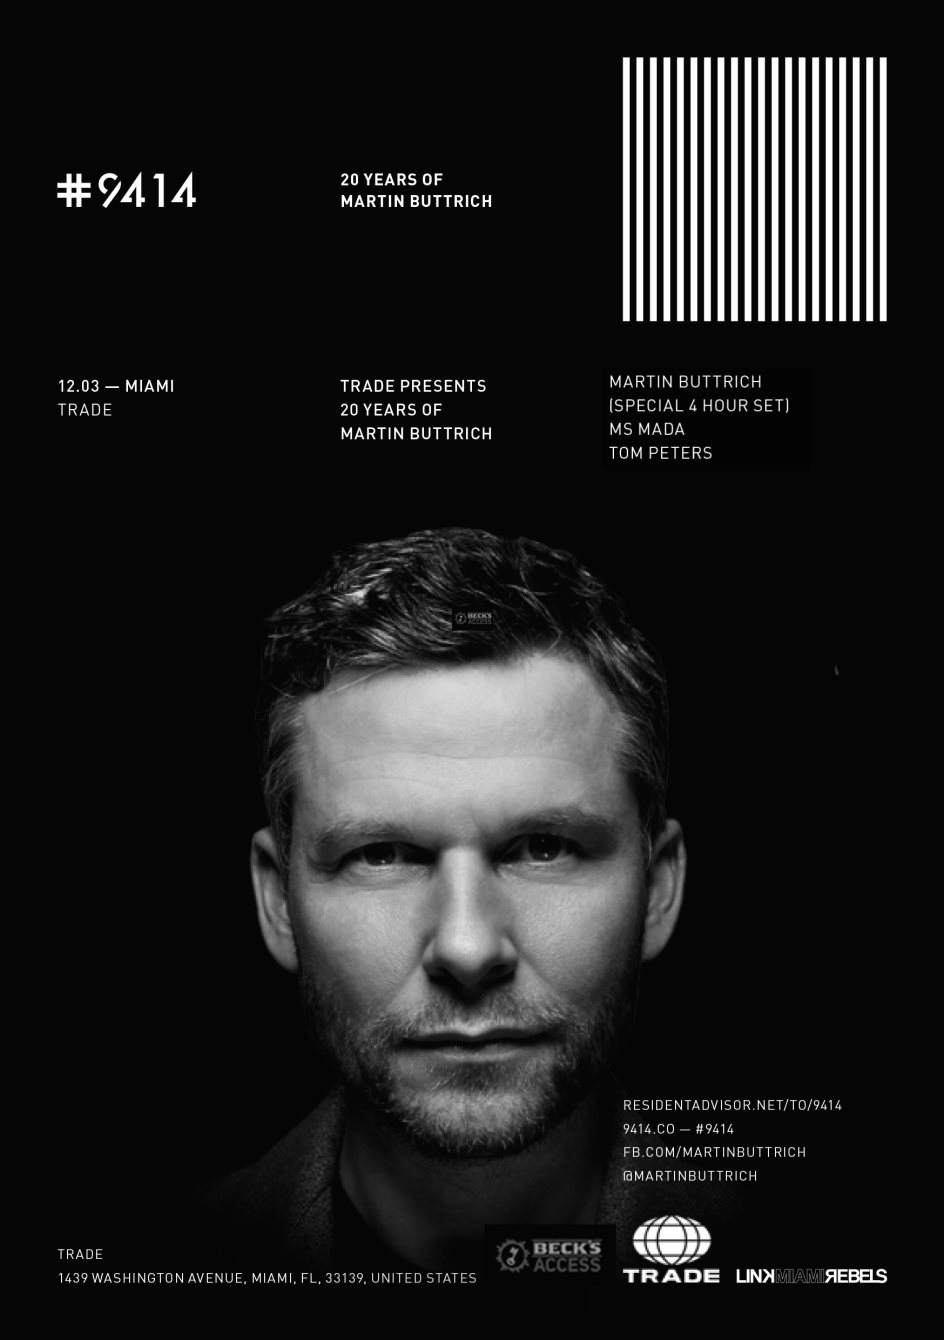 #9414 20 Years of Martin Buttrich by Link Miami Rebels Art Basel Edition - Página frontal